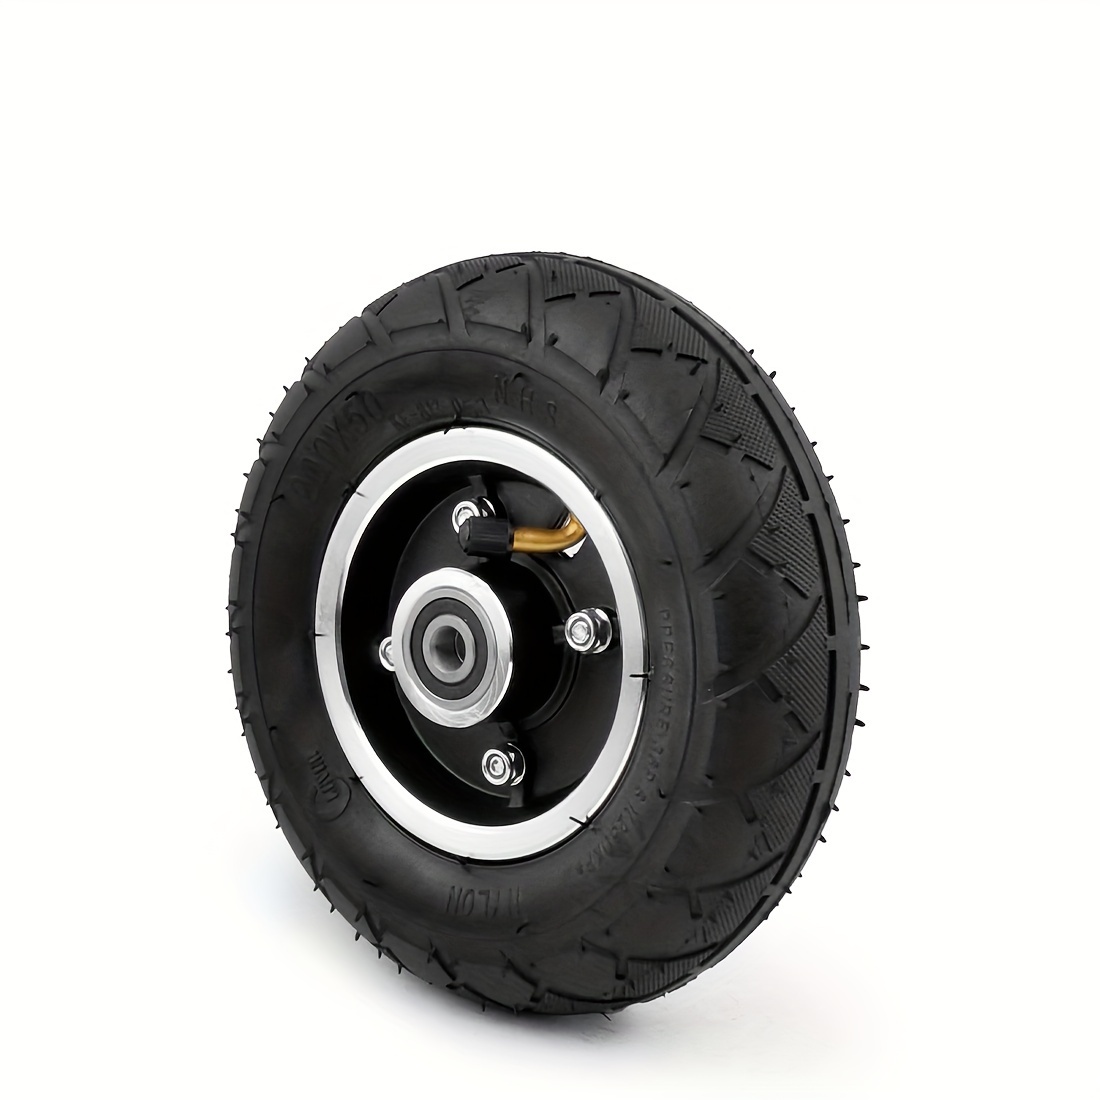  8.5x2.0 Electric Scooter Wheels Replacement Tire Honeycomb  Tires Solid Hole Shock Absorber Non-Pneumatic for M365 : Automotive